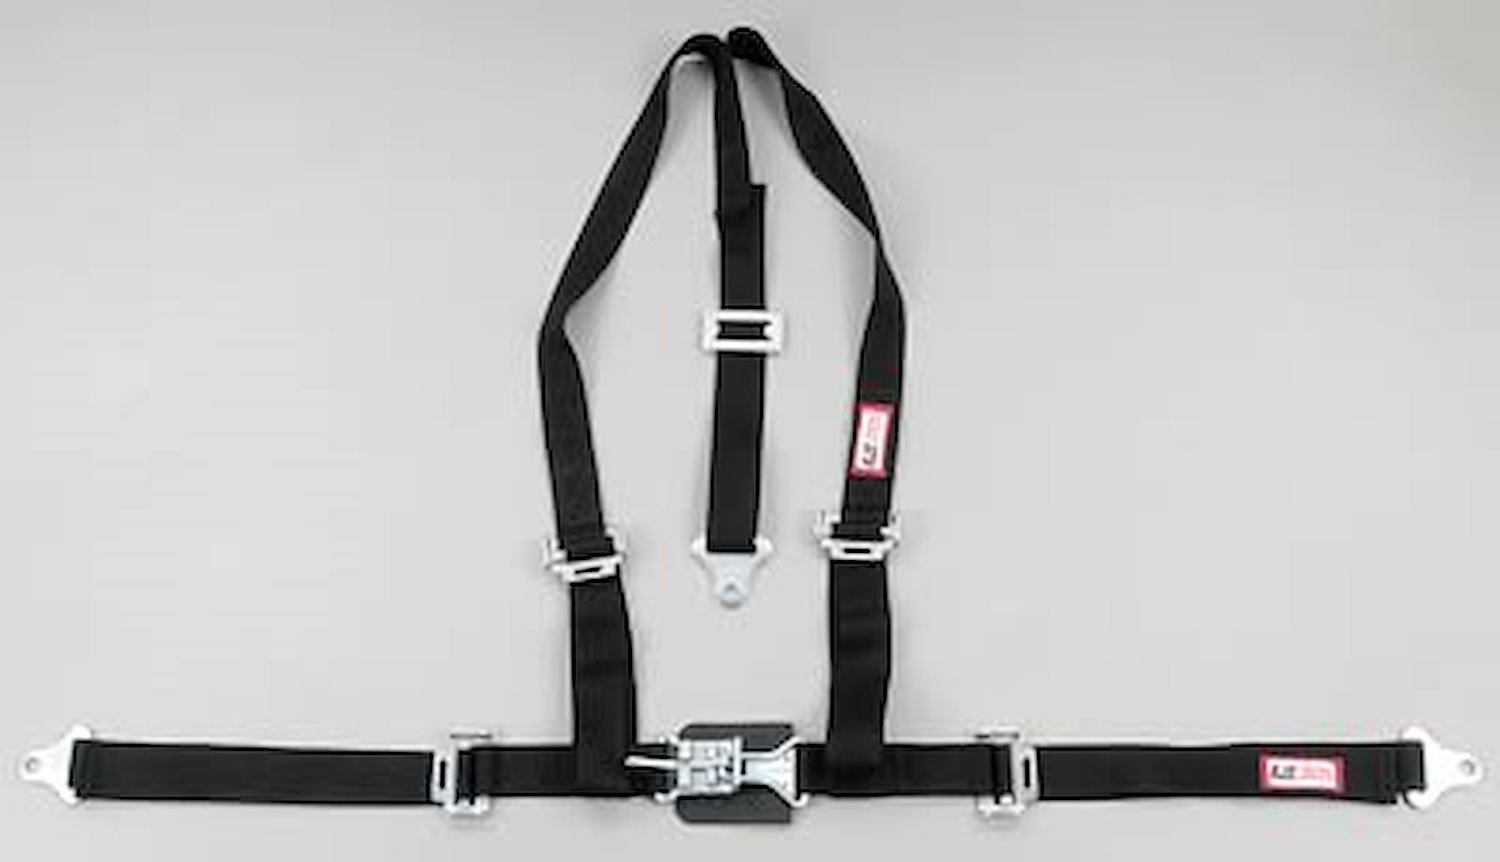 NON-SFI L&L HARNESS 3 PULL UP Lap Belt w/Adjuster SNAP 2 S.H. Y FLOOR Mount WRAP/SNAP RED